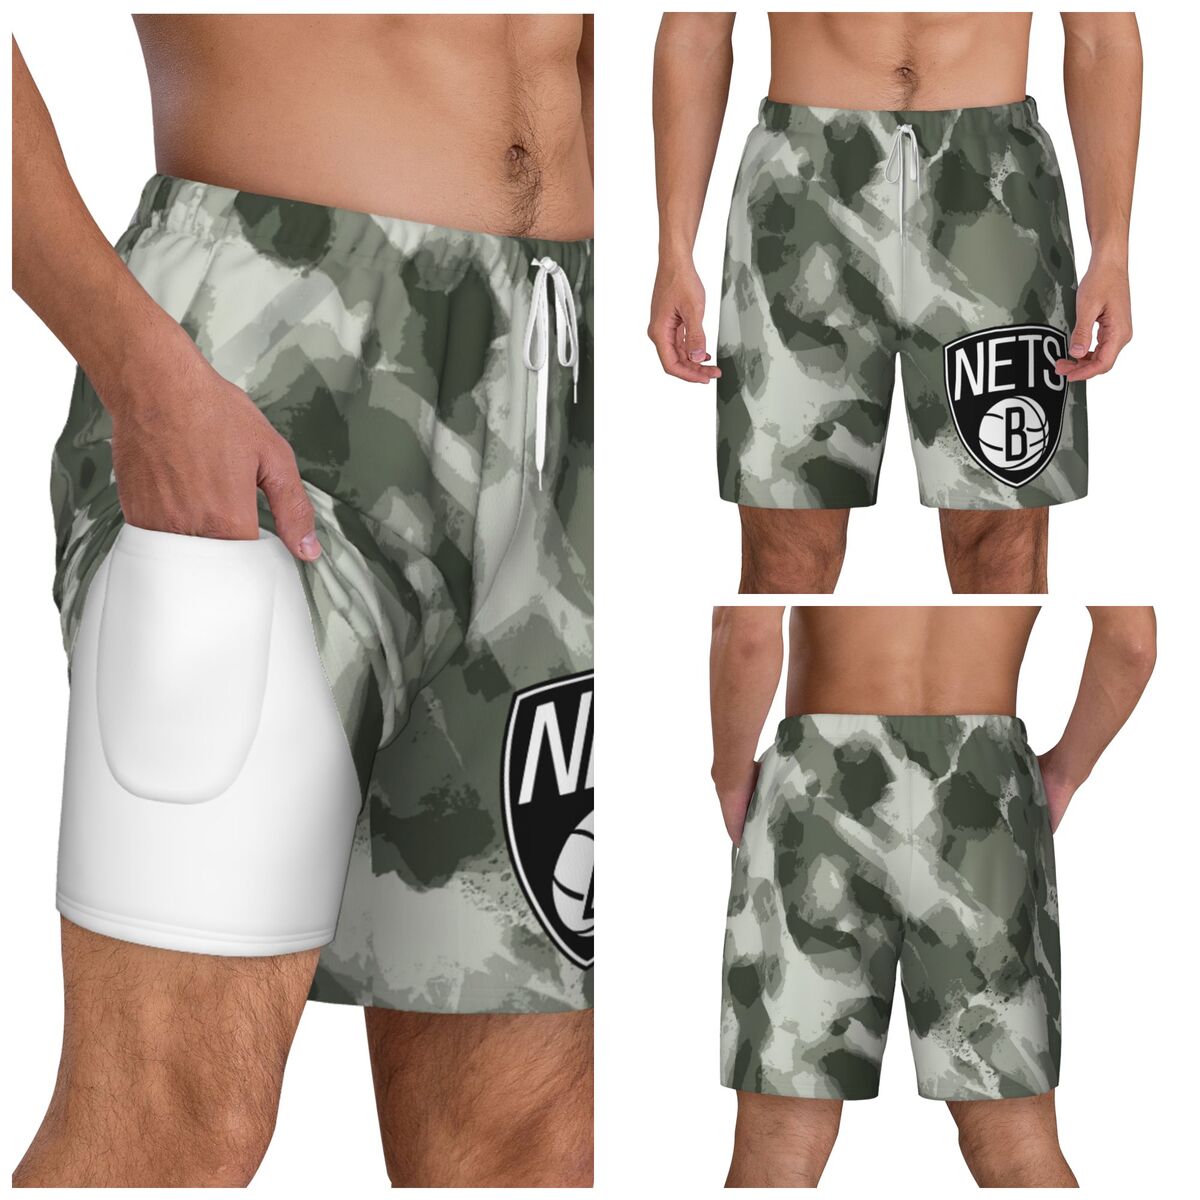 Brooklyn Nets Camo Men's Swim Trunks with Compression Liner